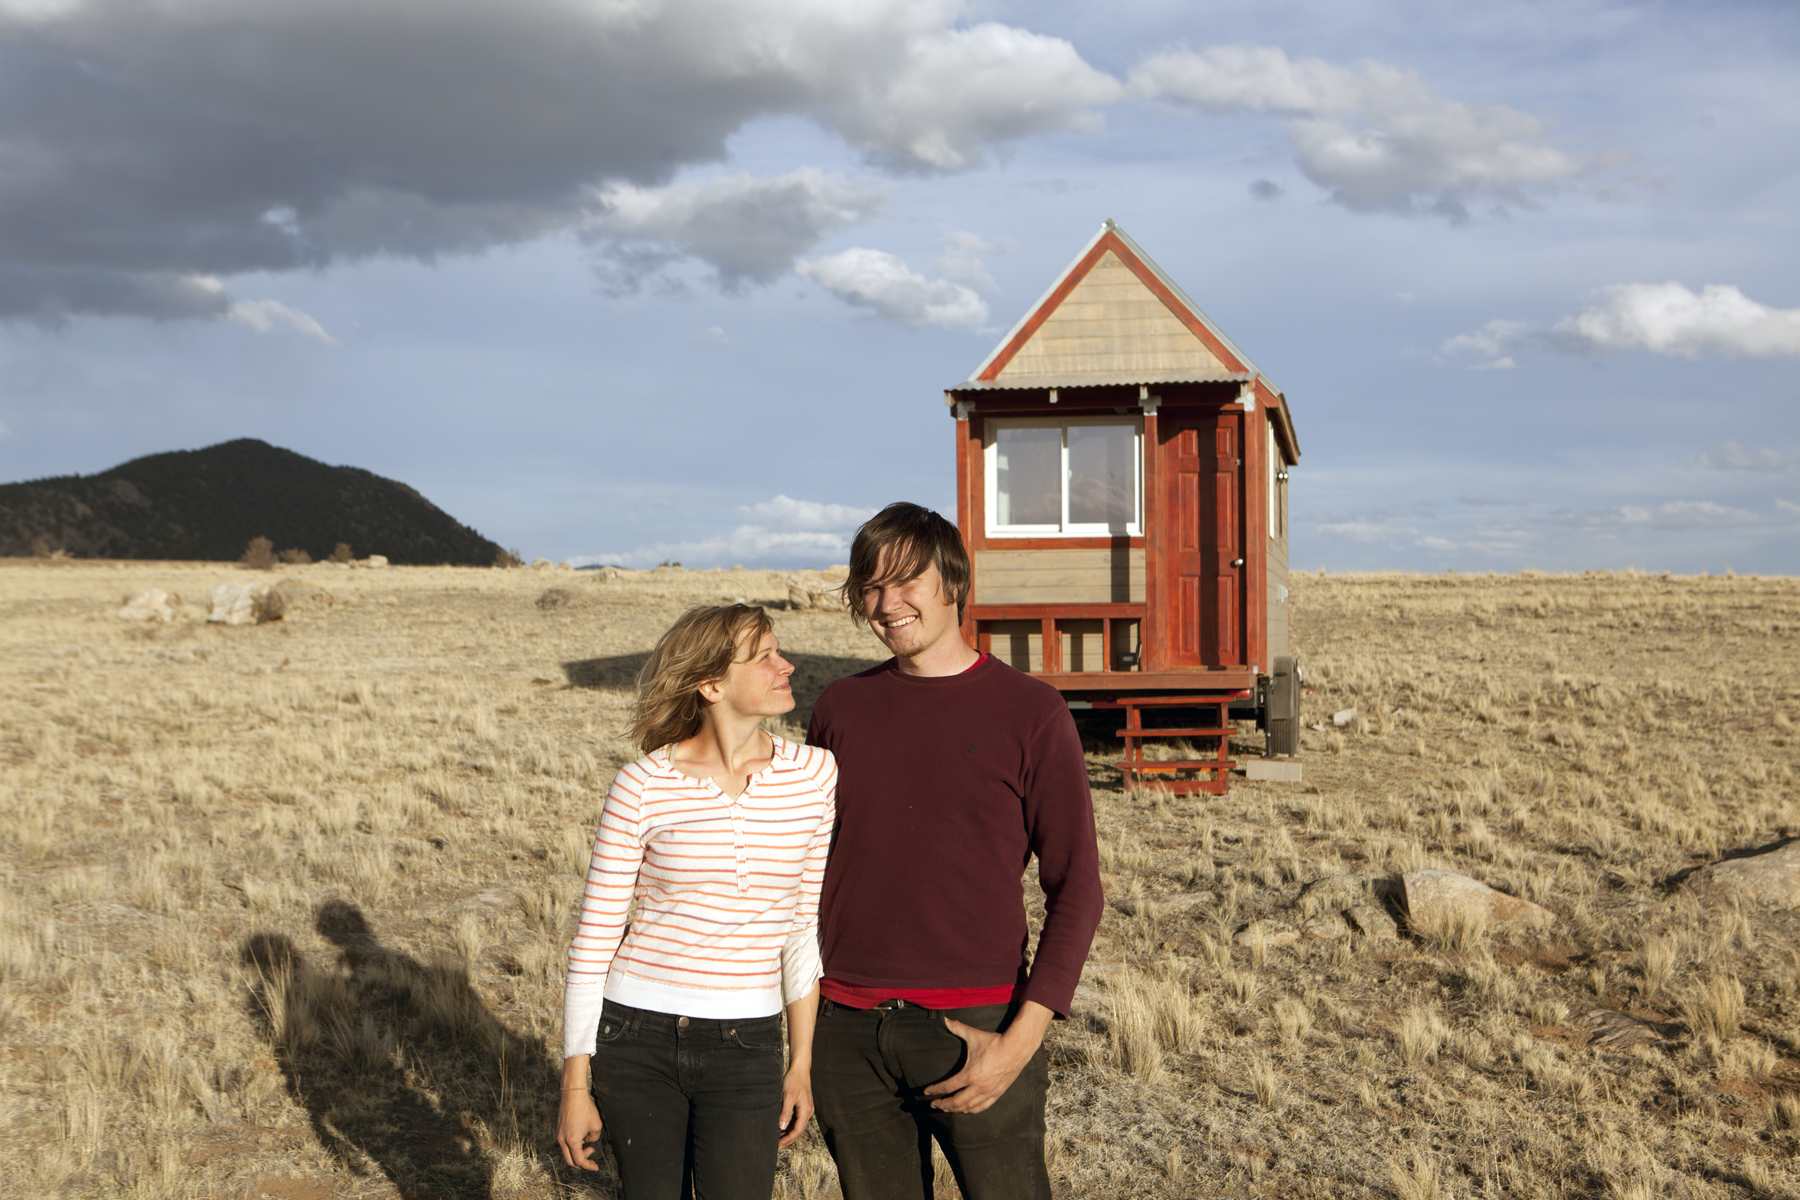 Merete & Chris in front of their "Tiny" house